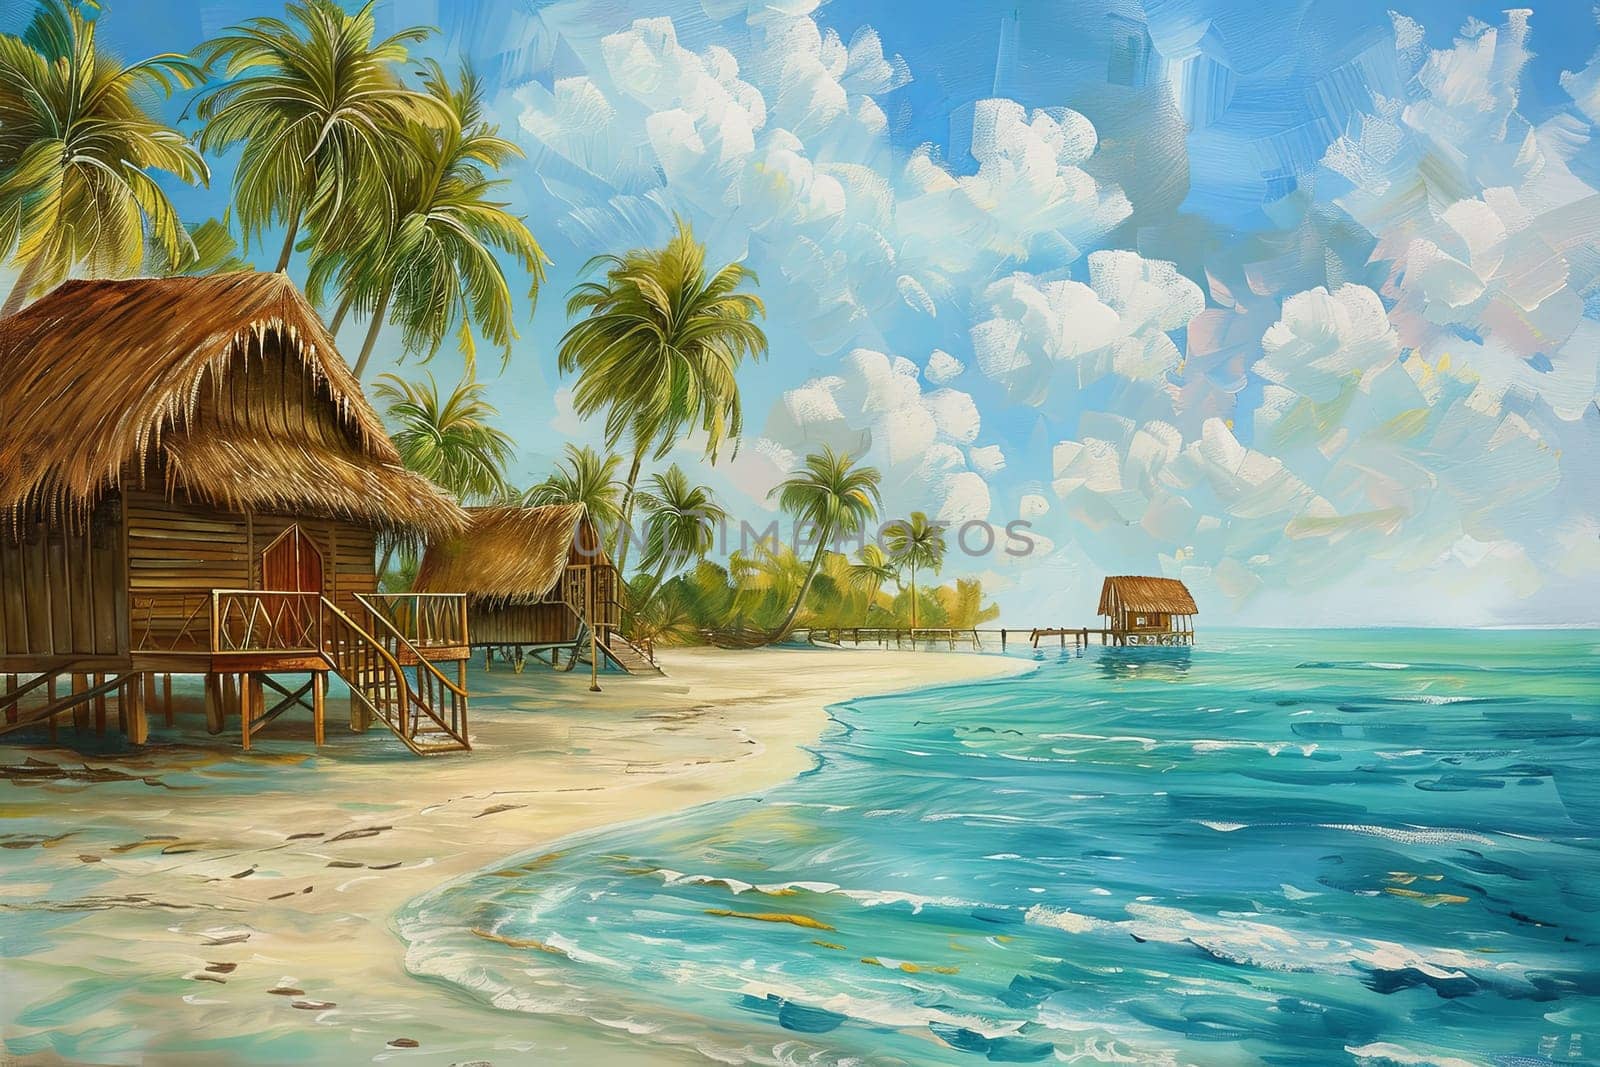 A painting depicting a tropical beach with a hut and palm trees against a backdrop of the azure sea.